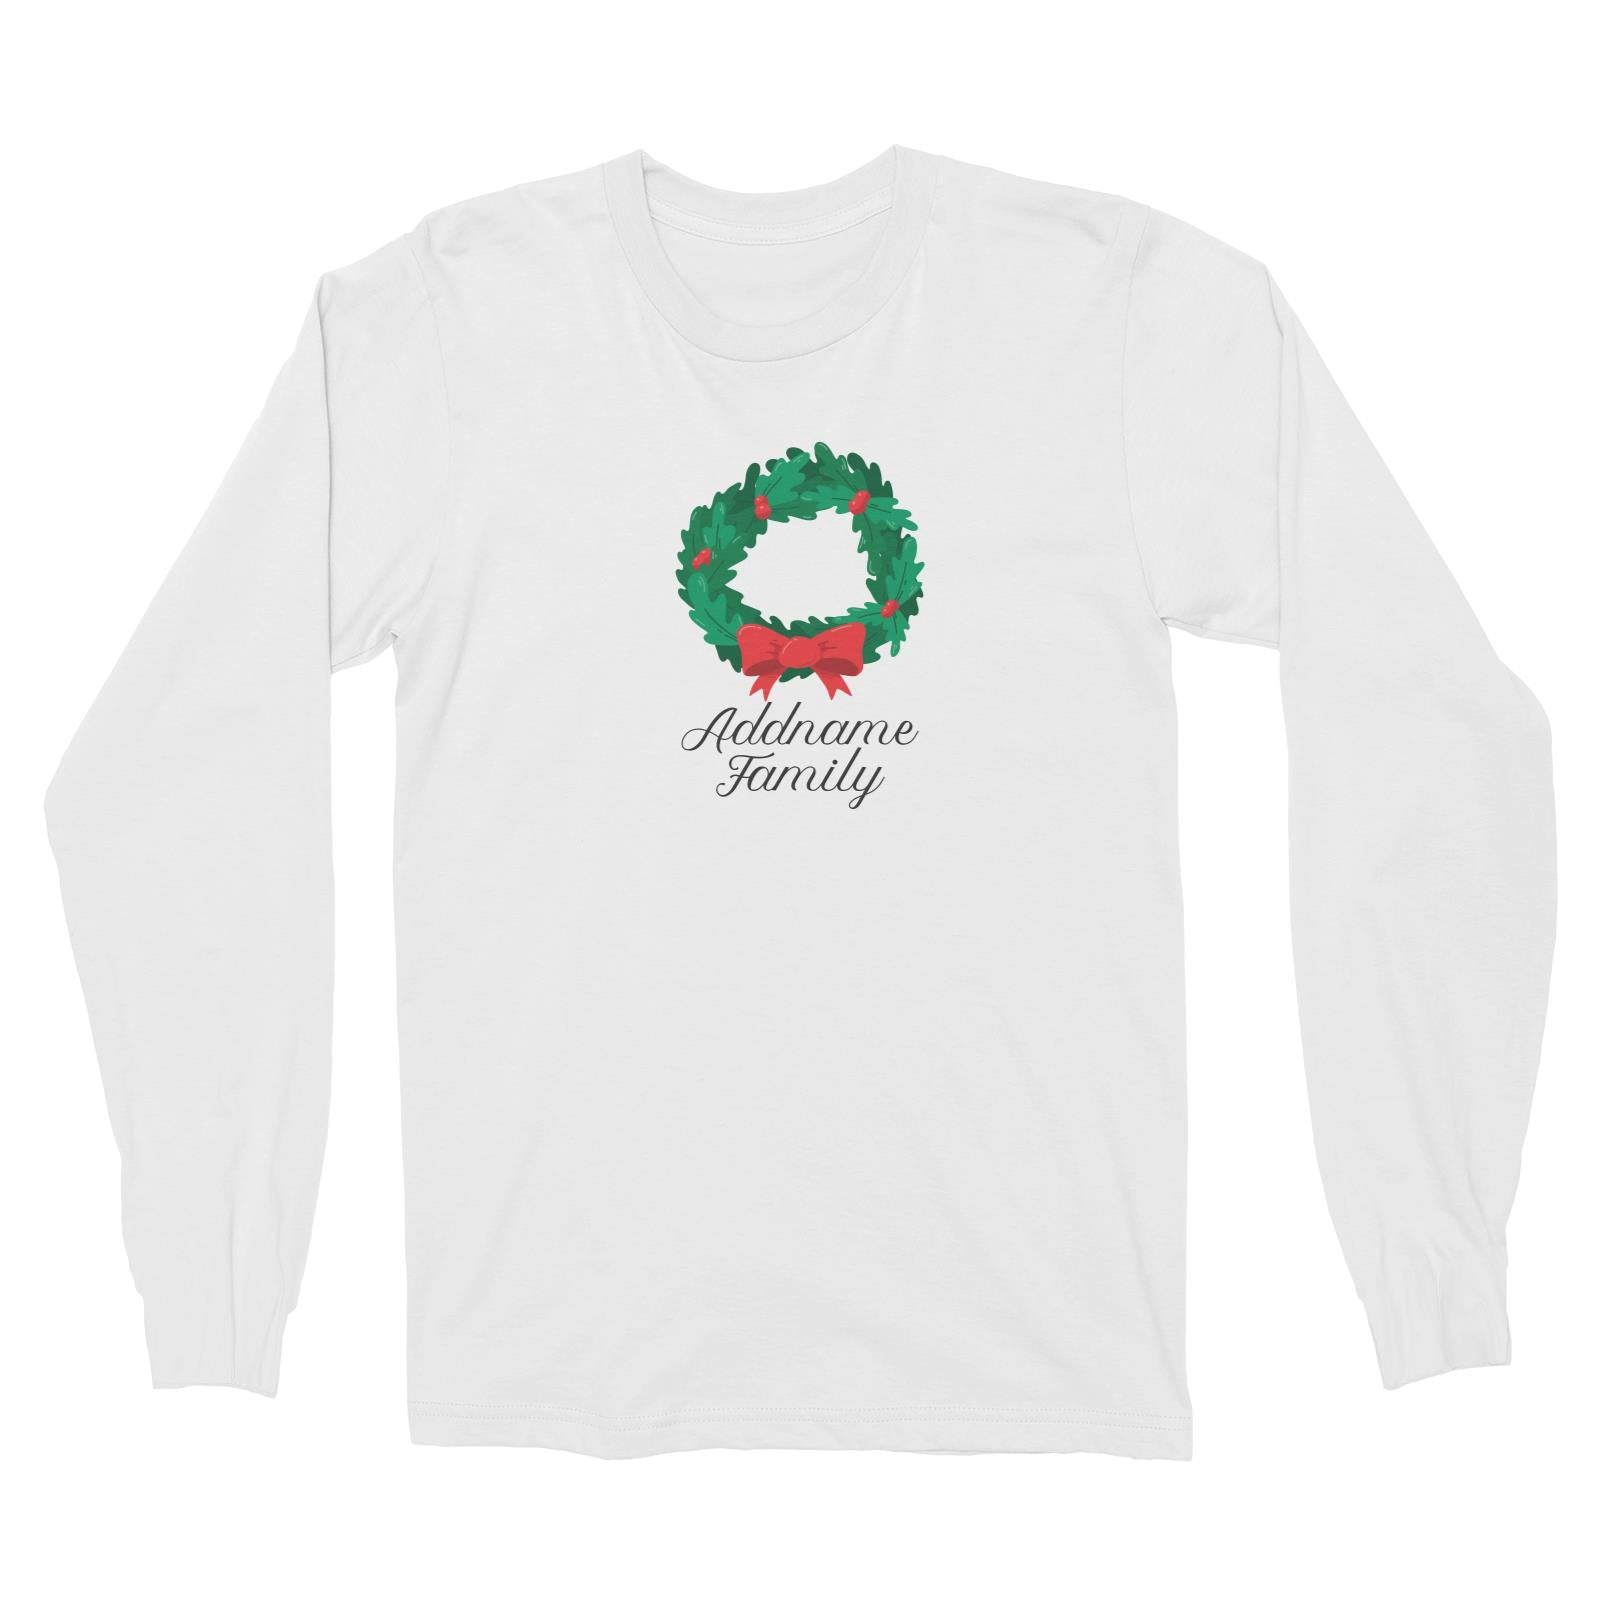 Christmas Series Wreath with Ribbon Addname Family Long Sleeve Unisex T-Shirt